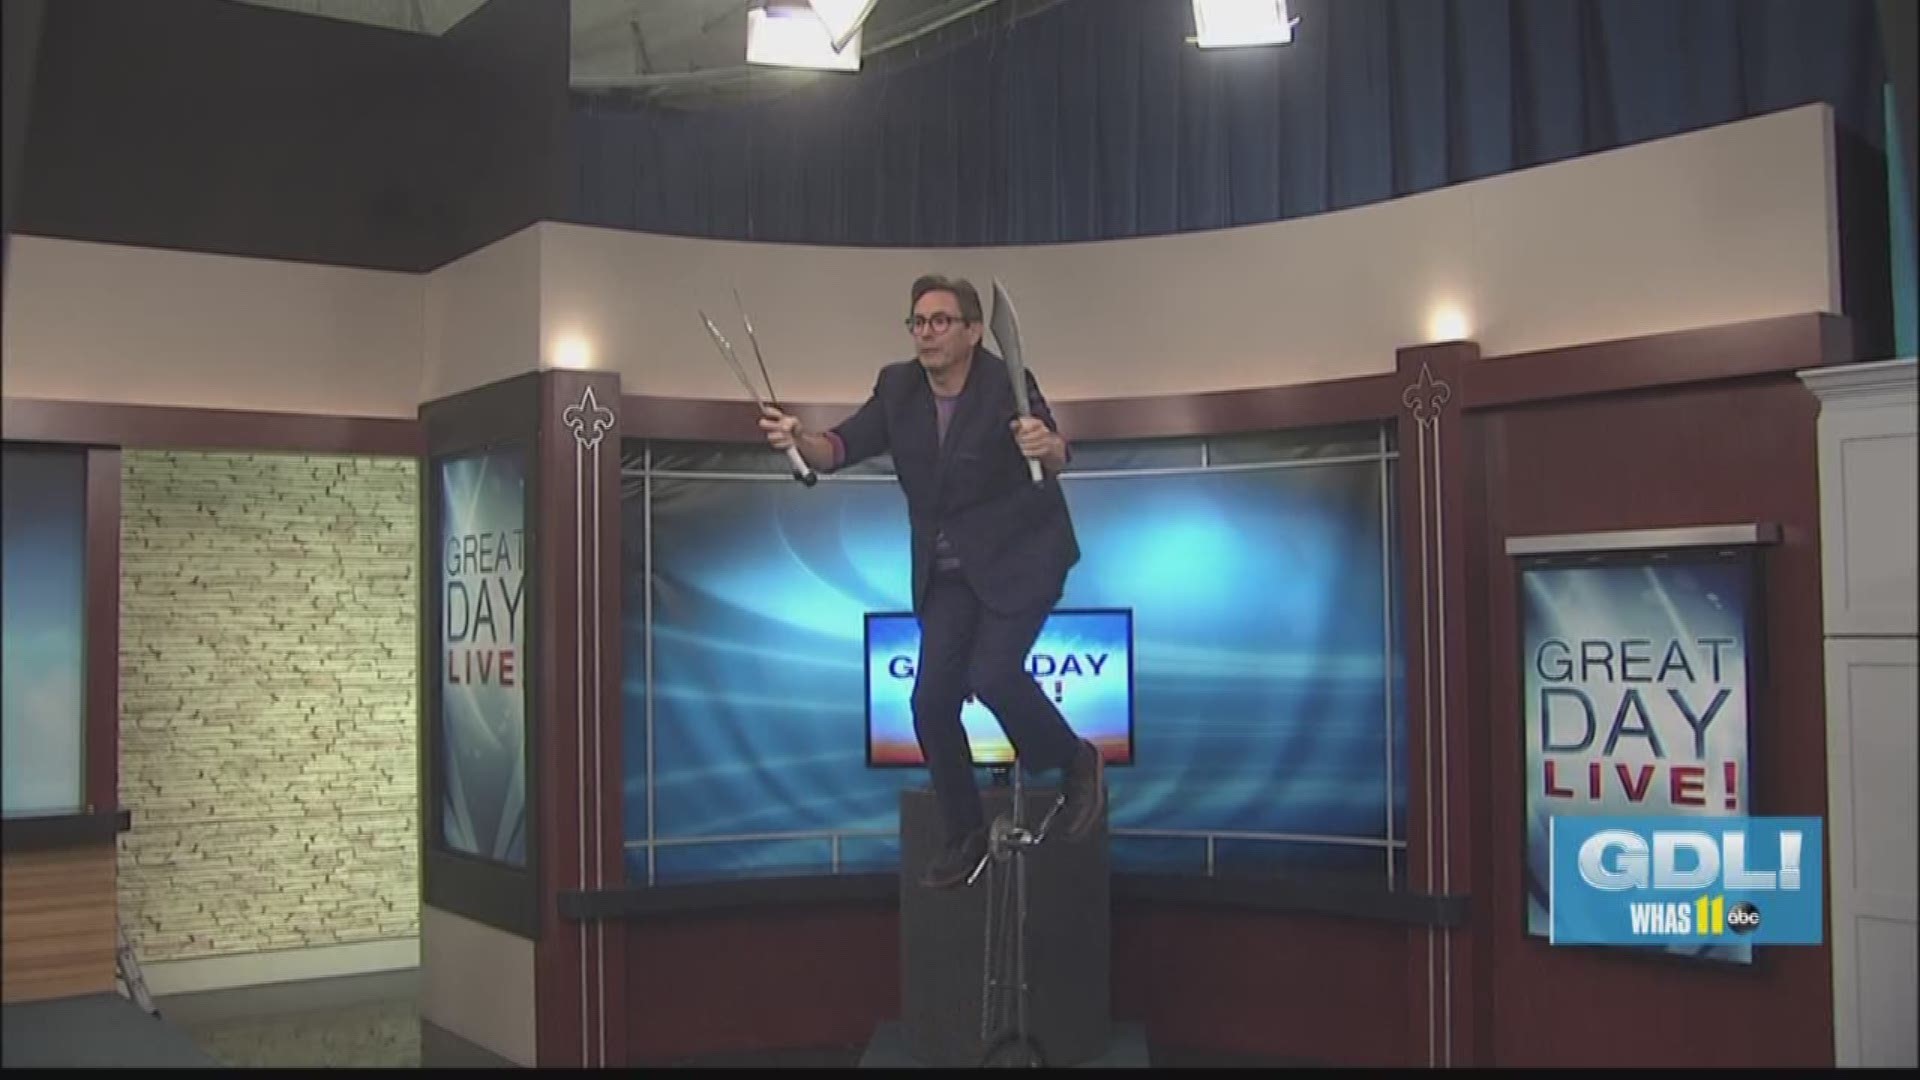 Michael Goudeau is a former writer for Penn and Teller and circus clown. Now he's clowning around with machetes atop a unicycle in the GDL studio!Michael Goudeau used to write for Penn and Teller and is a former circus clown. He was a special guest on L